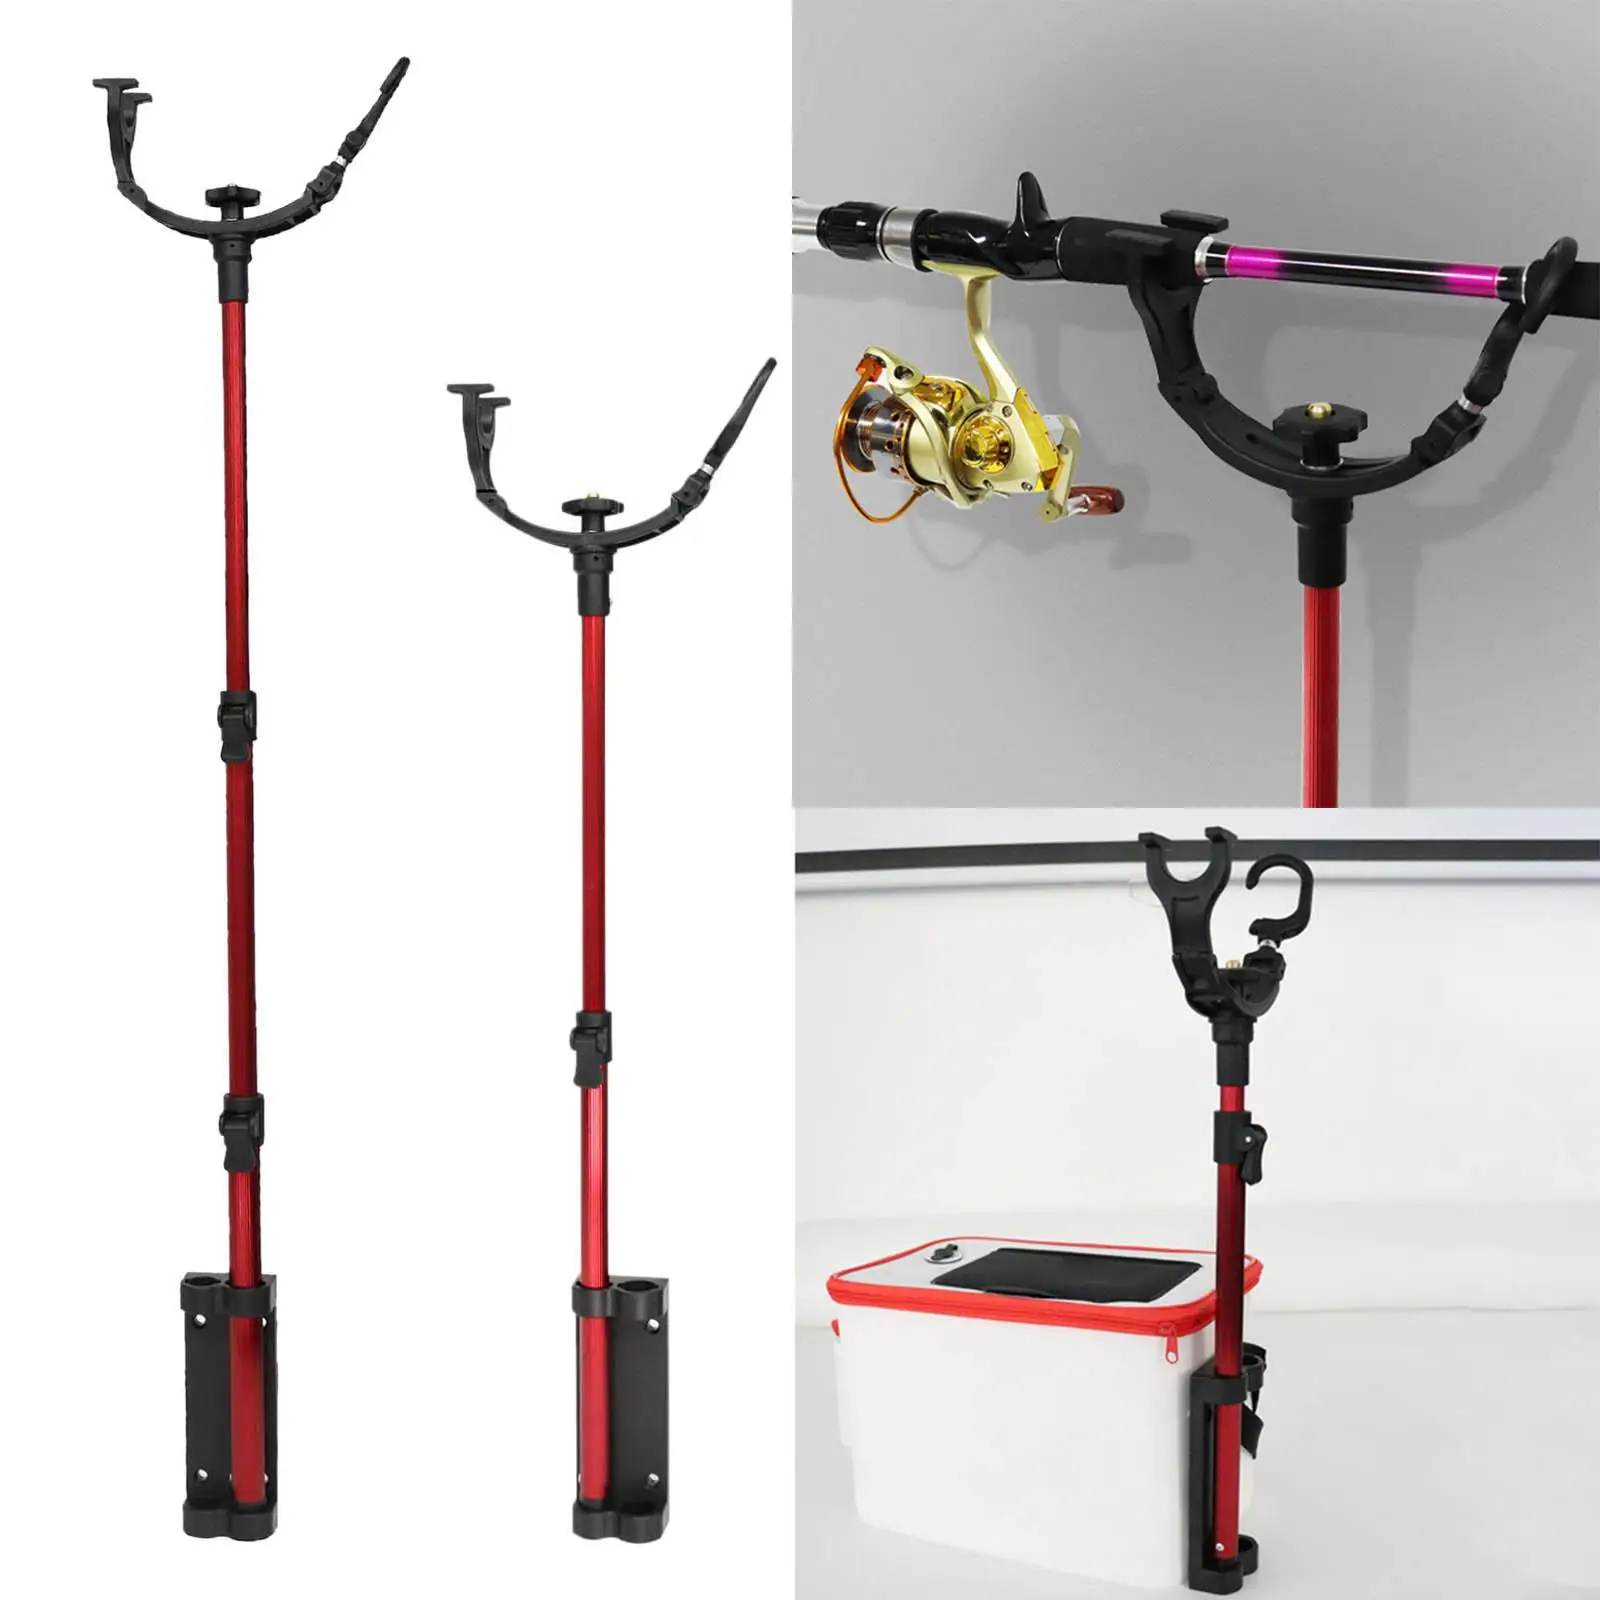 Multifunction Fishing Rod Holder Adjustable Durable with Ground Stake Fish Pole